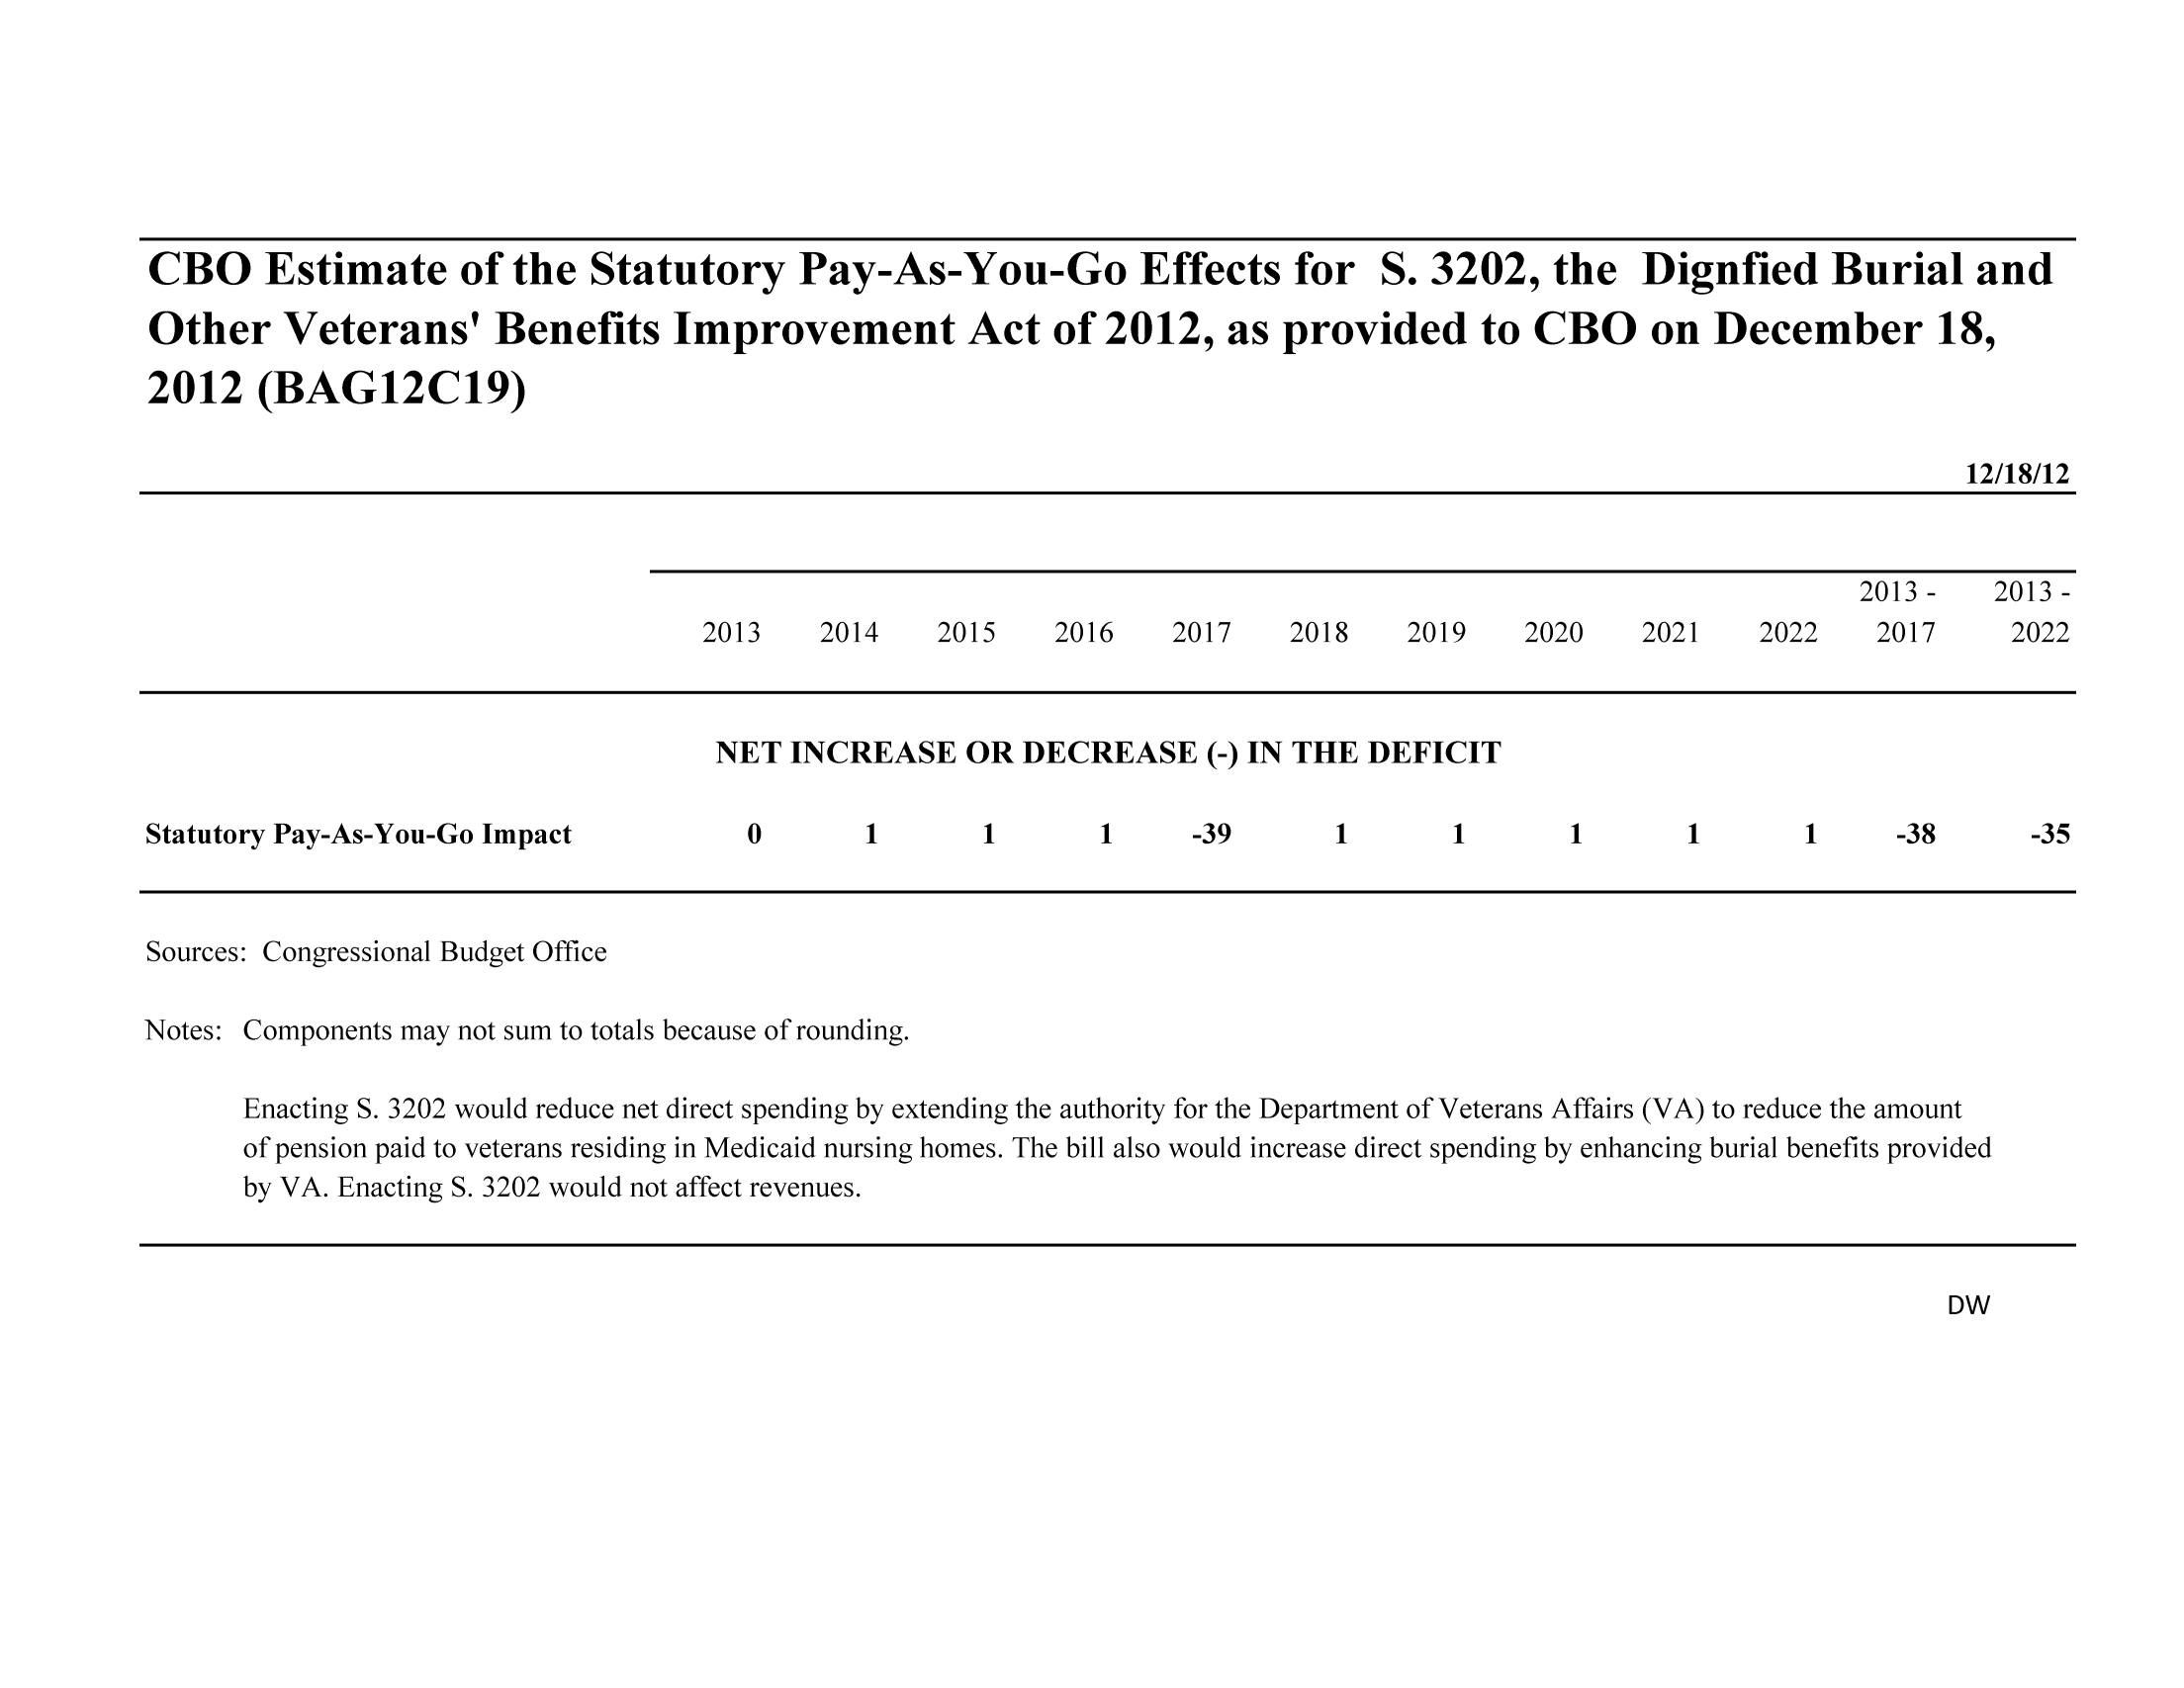 handle is hein.congrec/cbo10961 and id is 1 raw text is: CBO Estimate of the Statutory Pay-As-You-Go Effects for S. 3202, the Dignfied Burial
Other Veterans' Benefits Improvement Act of 2012, as provided to CBO on December 18
2012 (BAG12C19)
2013 -
2013     2014     2015     2016     2017     2018     2019     2020     2021     2022     2017
NET INCREASE OR DECREASE (-) IN THE DEFICIT
Statutory Pay-As-You-Go Impact                0        1        1        1      -39        1        1        1        1        1      -38
Sources: Congressional Budget Office
Notes: Components may not sum to totals because of rounding.
Enacting S. 3202 would reduce net direct spending by extending the authority for the Department of Veterans Affairs (VA) to reduce the amount
of pension paid to veterans residing in Medicaid nursing homes. The bill also would increase direct spending by enhancing burial benefits provide
by VA. Enacting S. 3202 would not affect revenues.

and
2/18/12
2013 -
2022
-35
it

DW


